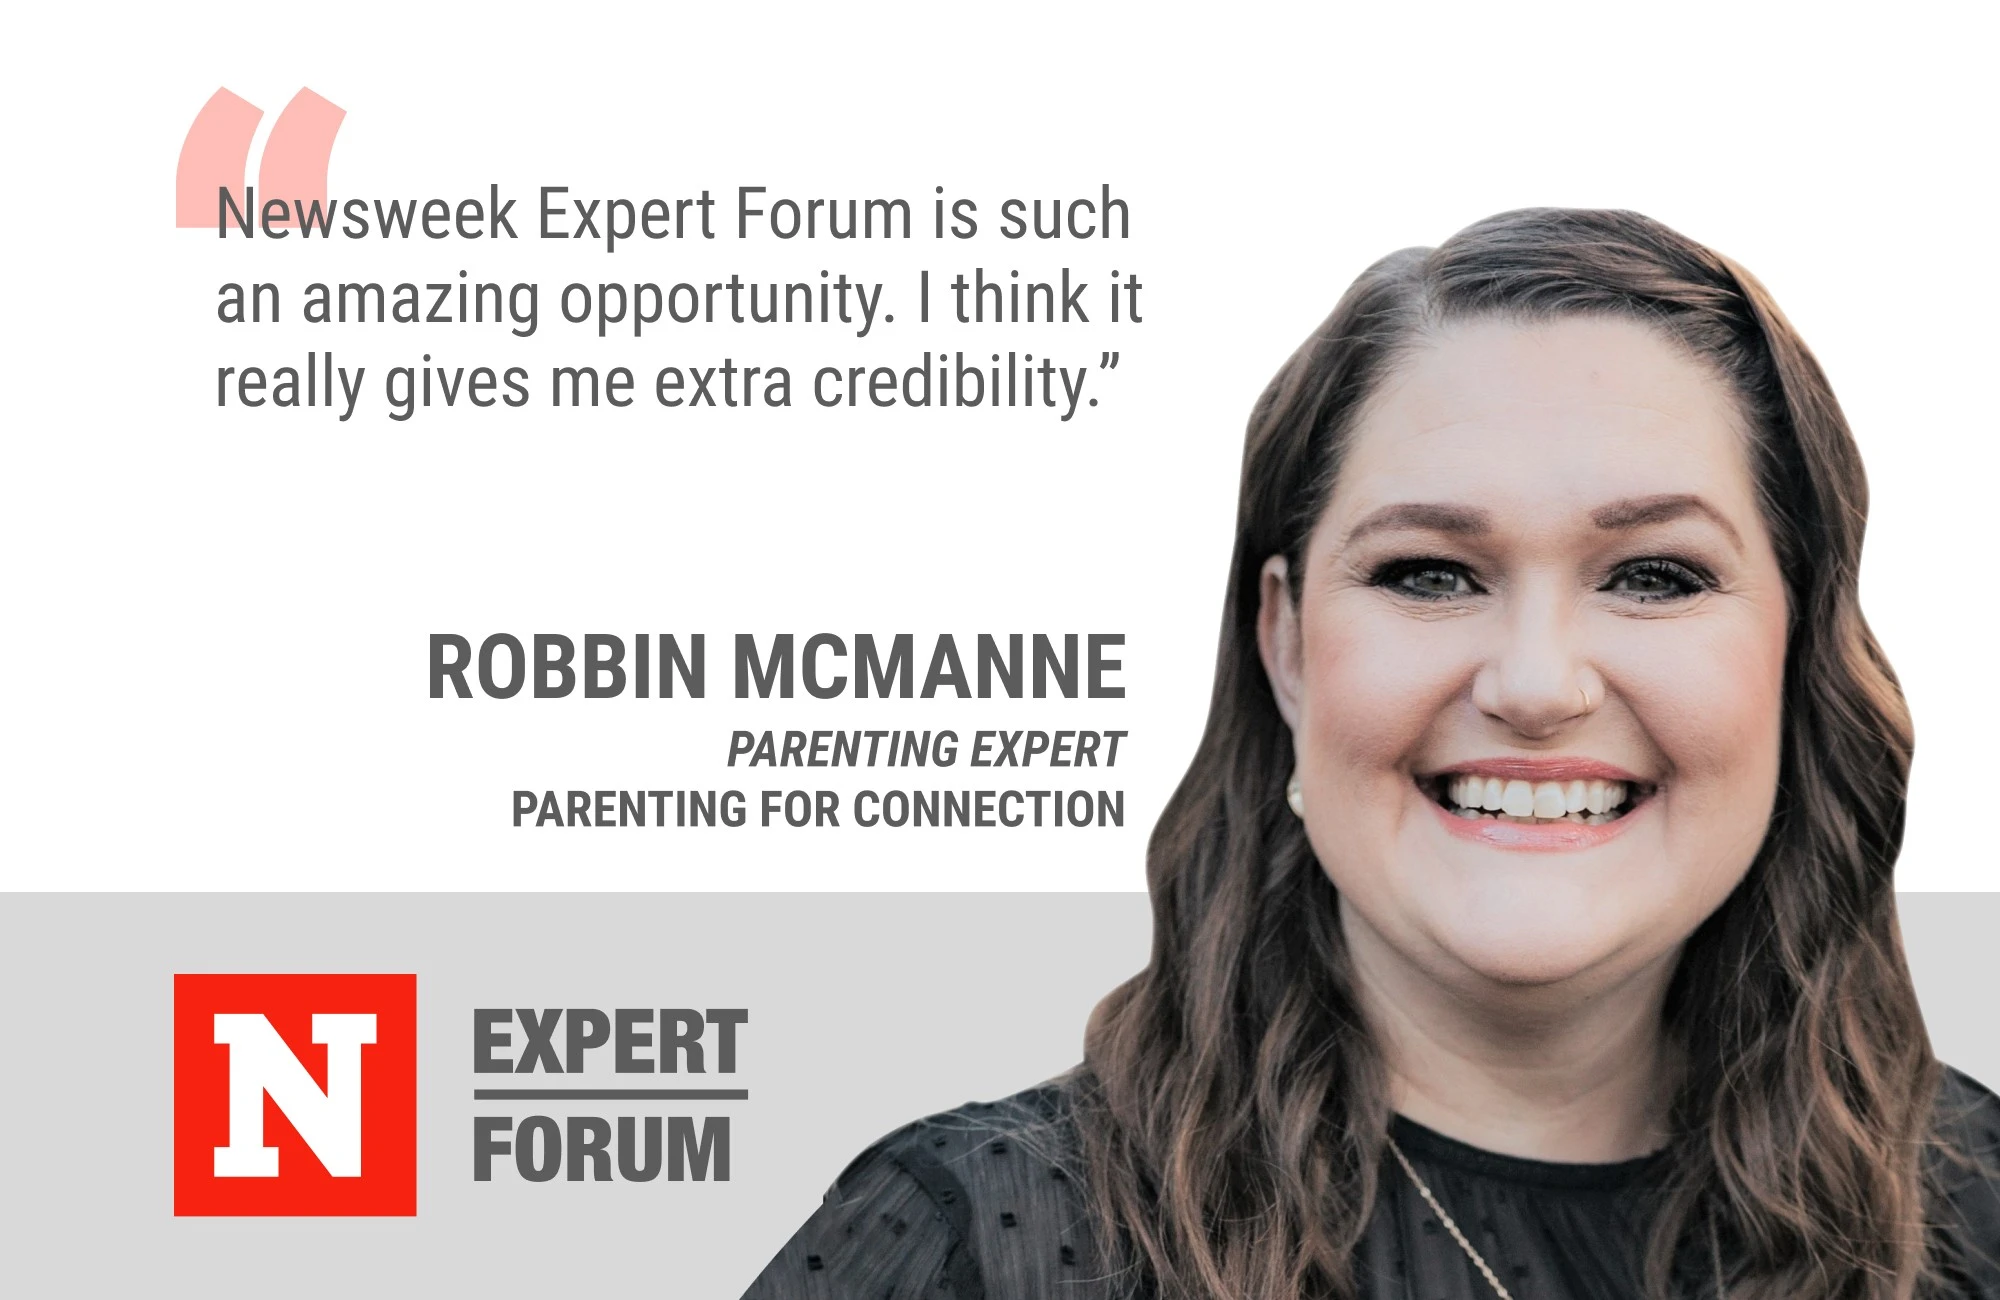 For Robbin McManne, Newsweek Expert Forum Results in Increased Credibility And New Business Referrals